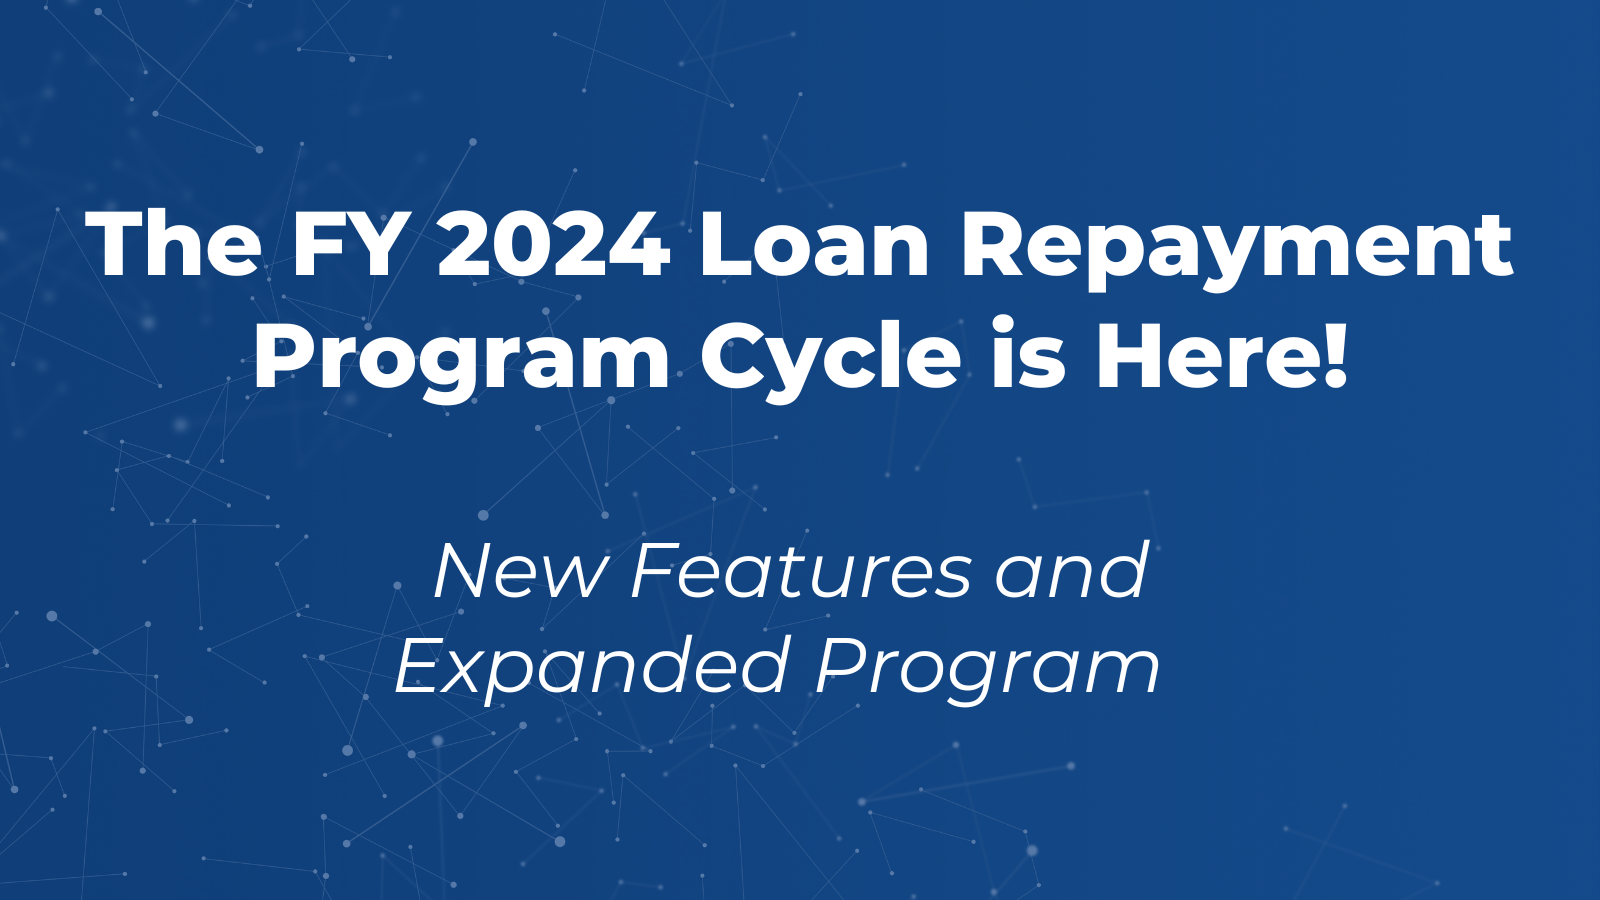 The FY 2024 Loan Repayment Program Cycle is Here New Features and